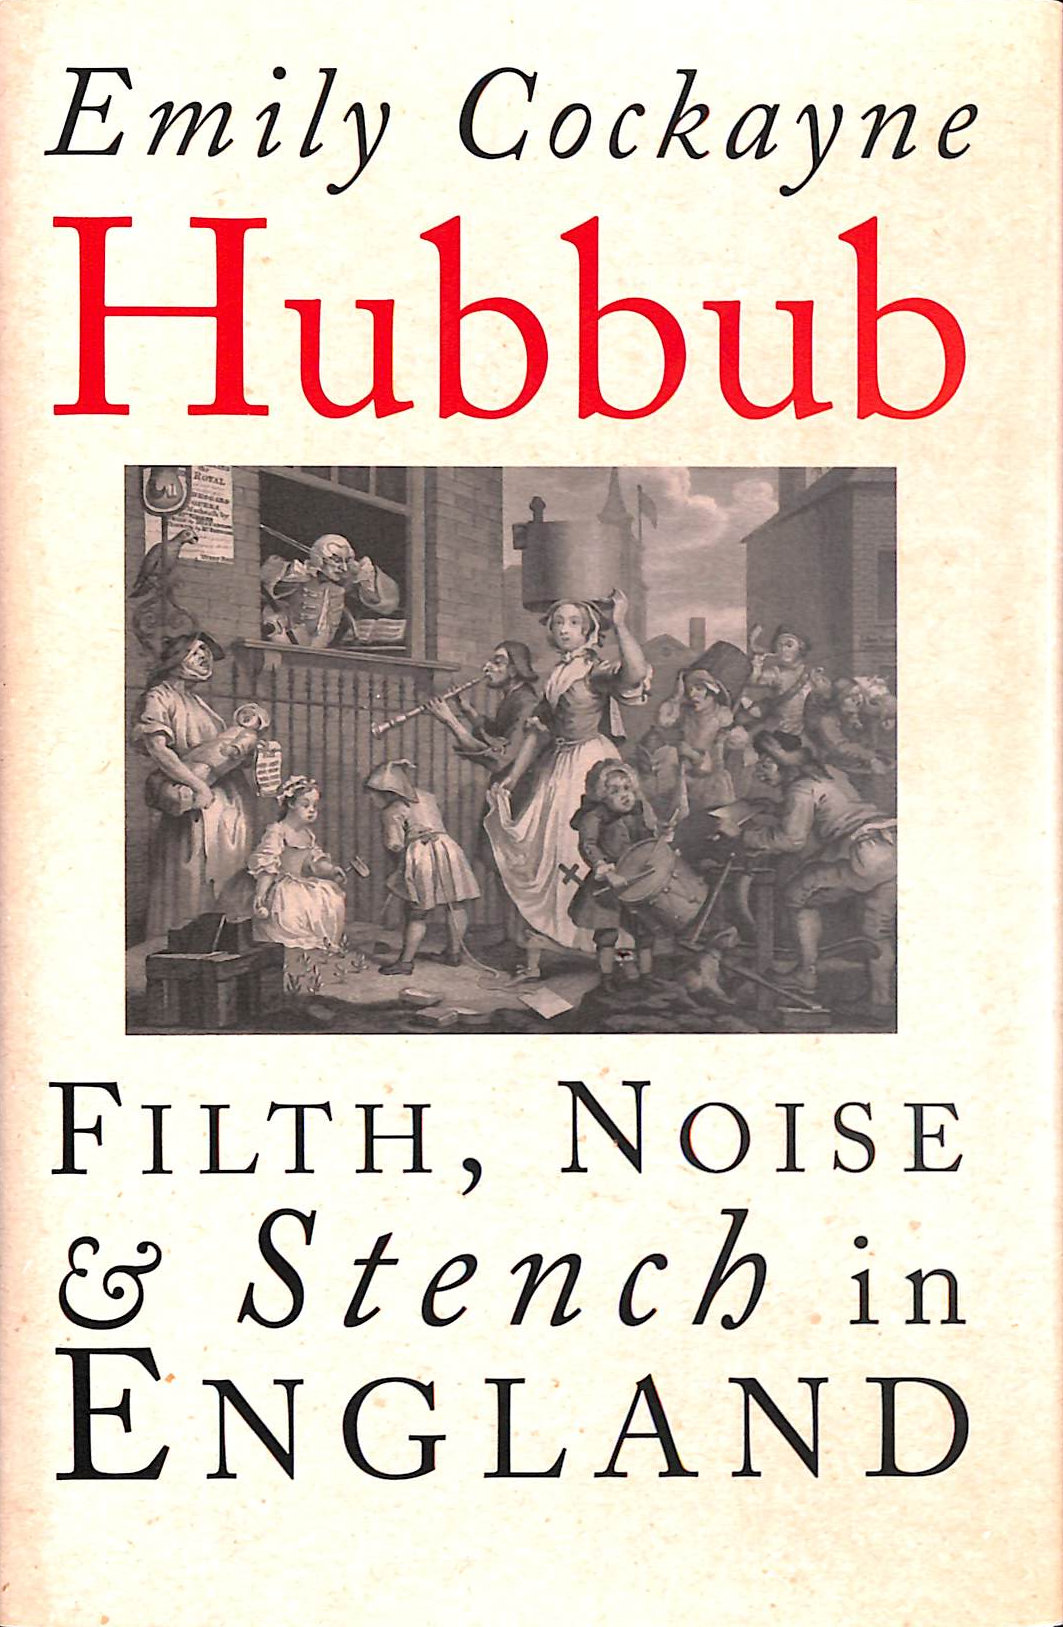 COCKAYNE, EMILY - Hubbub: Filth, Noise, and Stench in England, 1600-1770